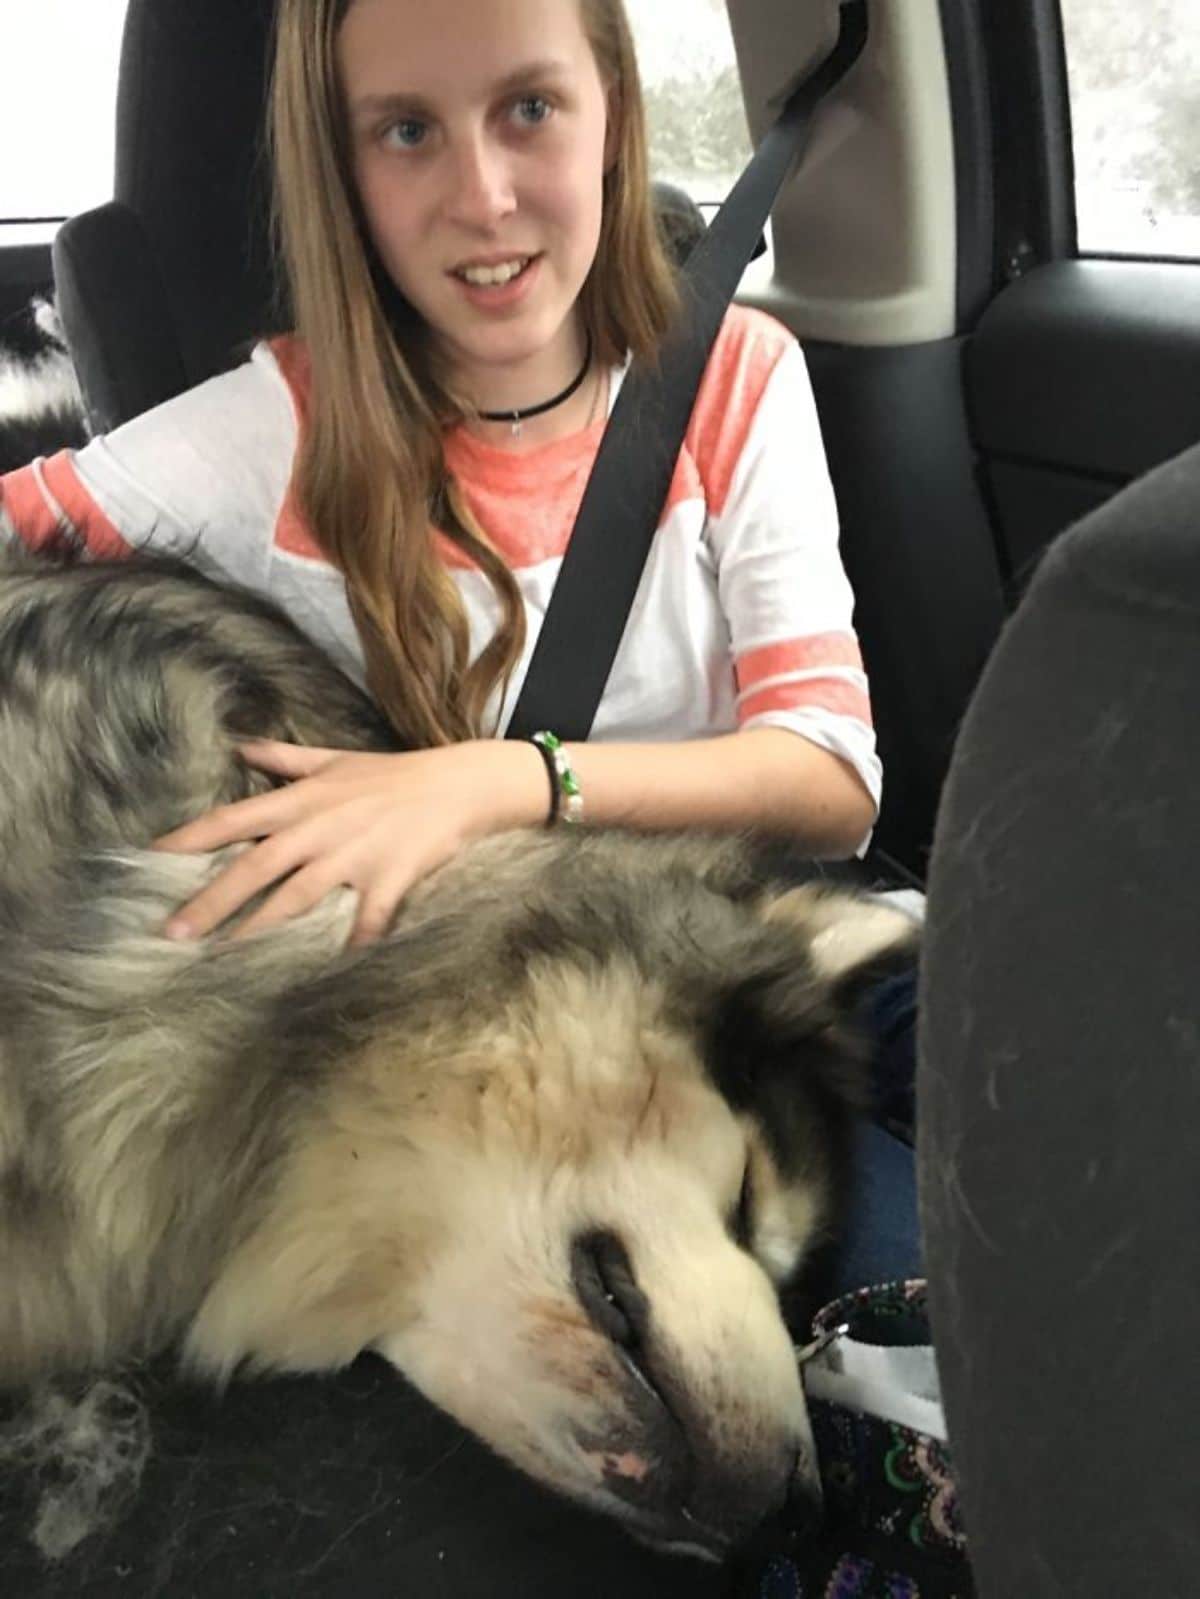 black and white husky laying its head on a woman's lap inside a vehicle